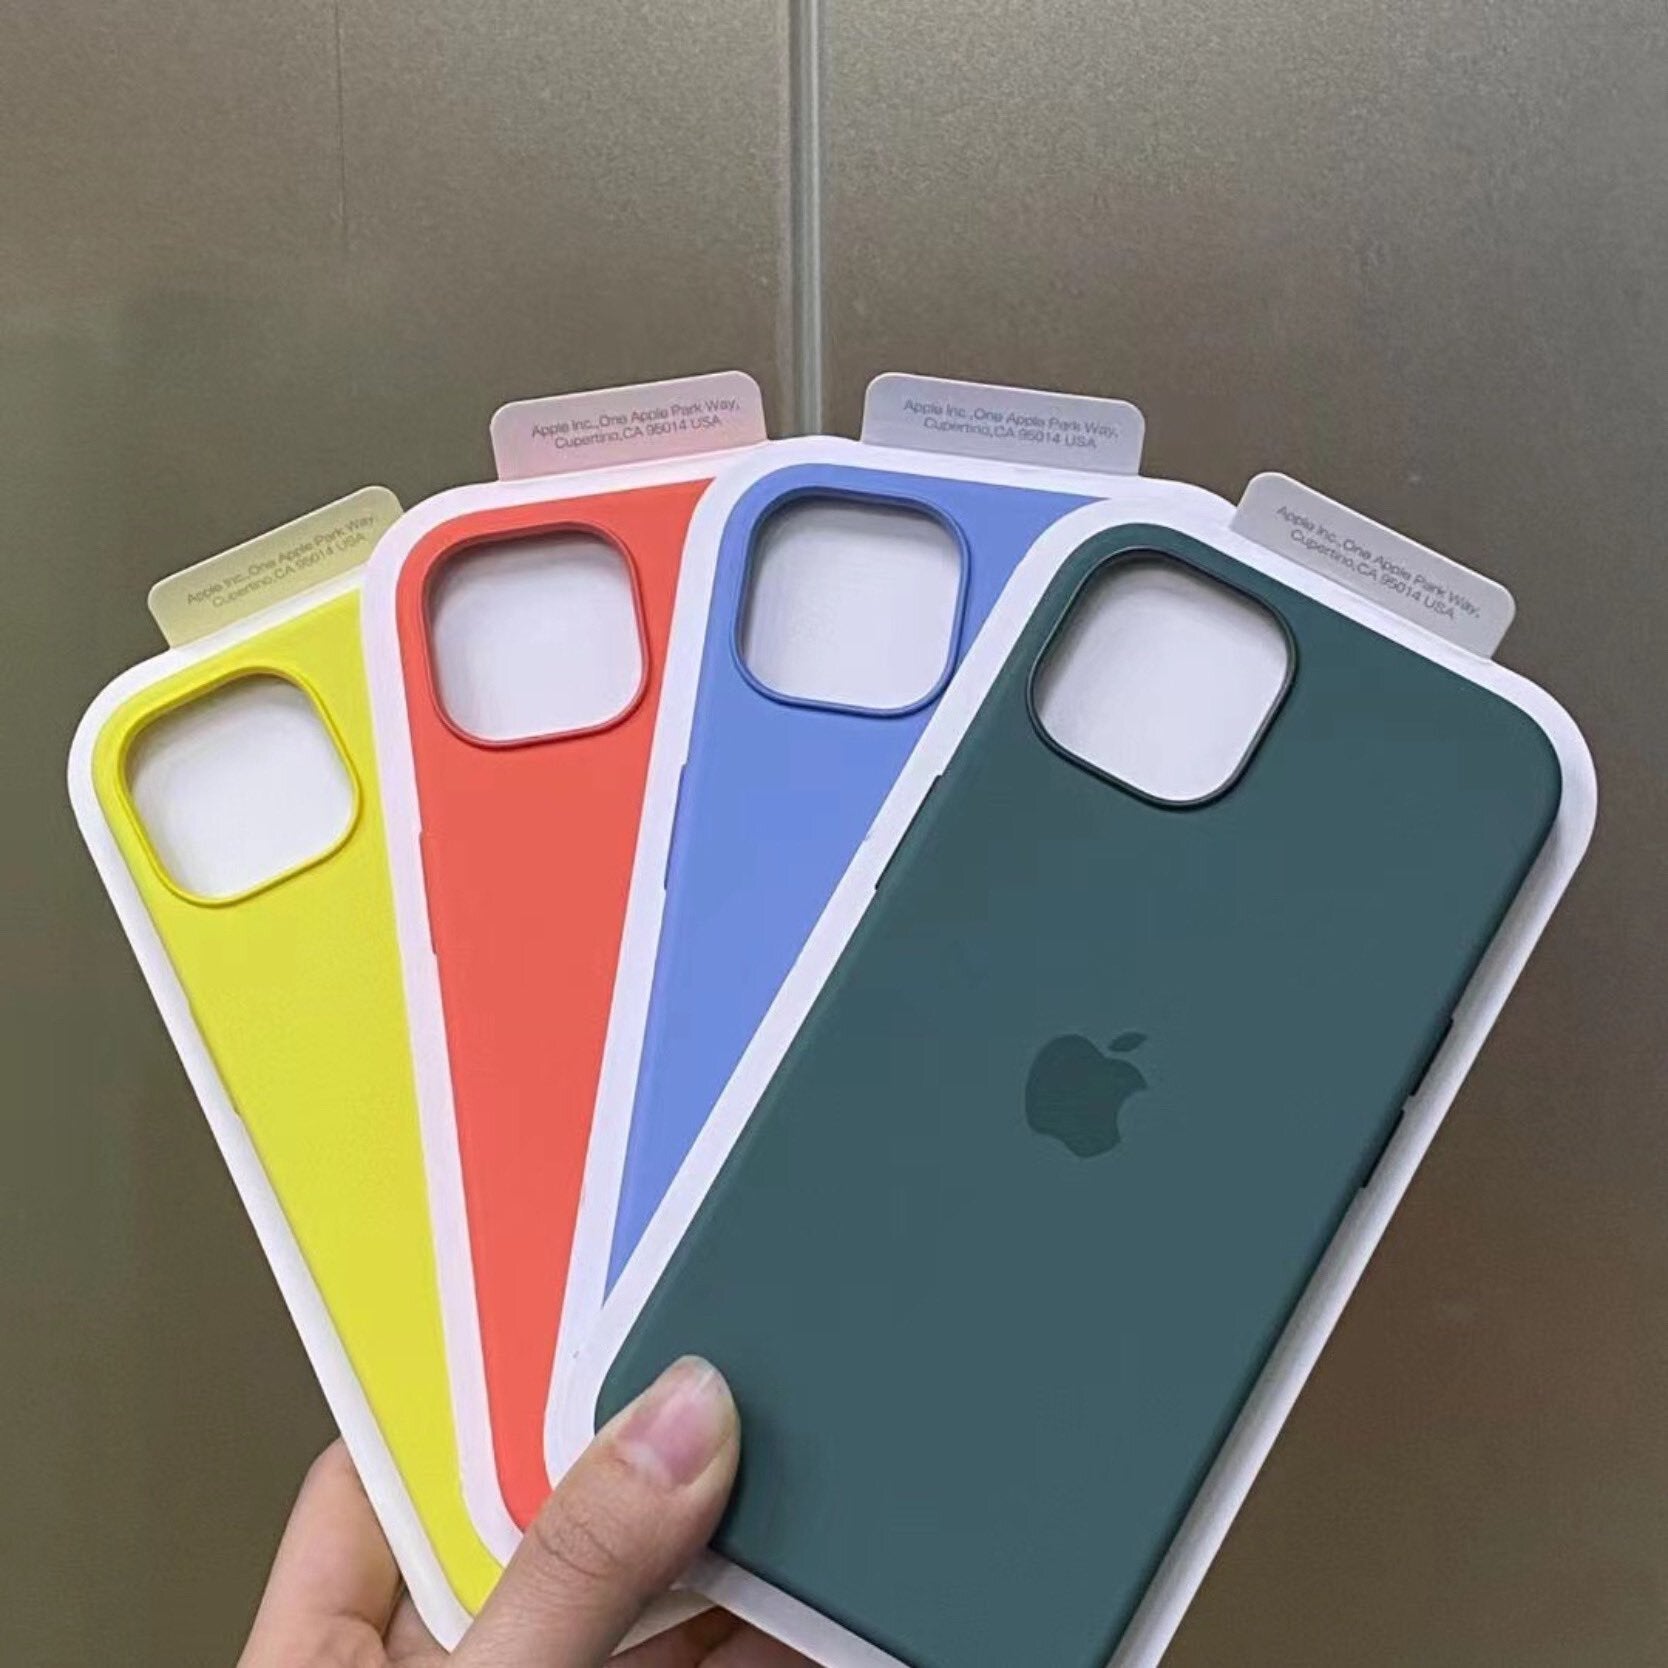 Reportedly, these are the new colors - Leaked images of four new iPhone 13 MagSafe cases appear online